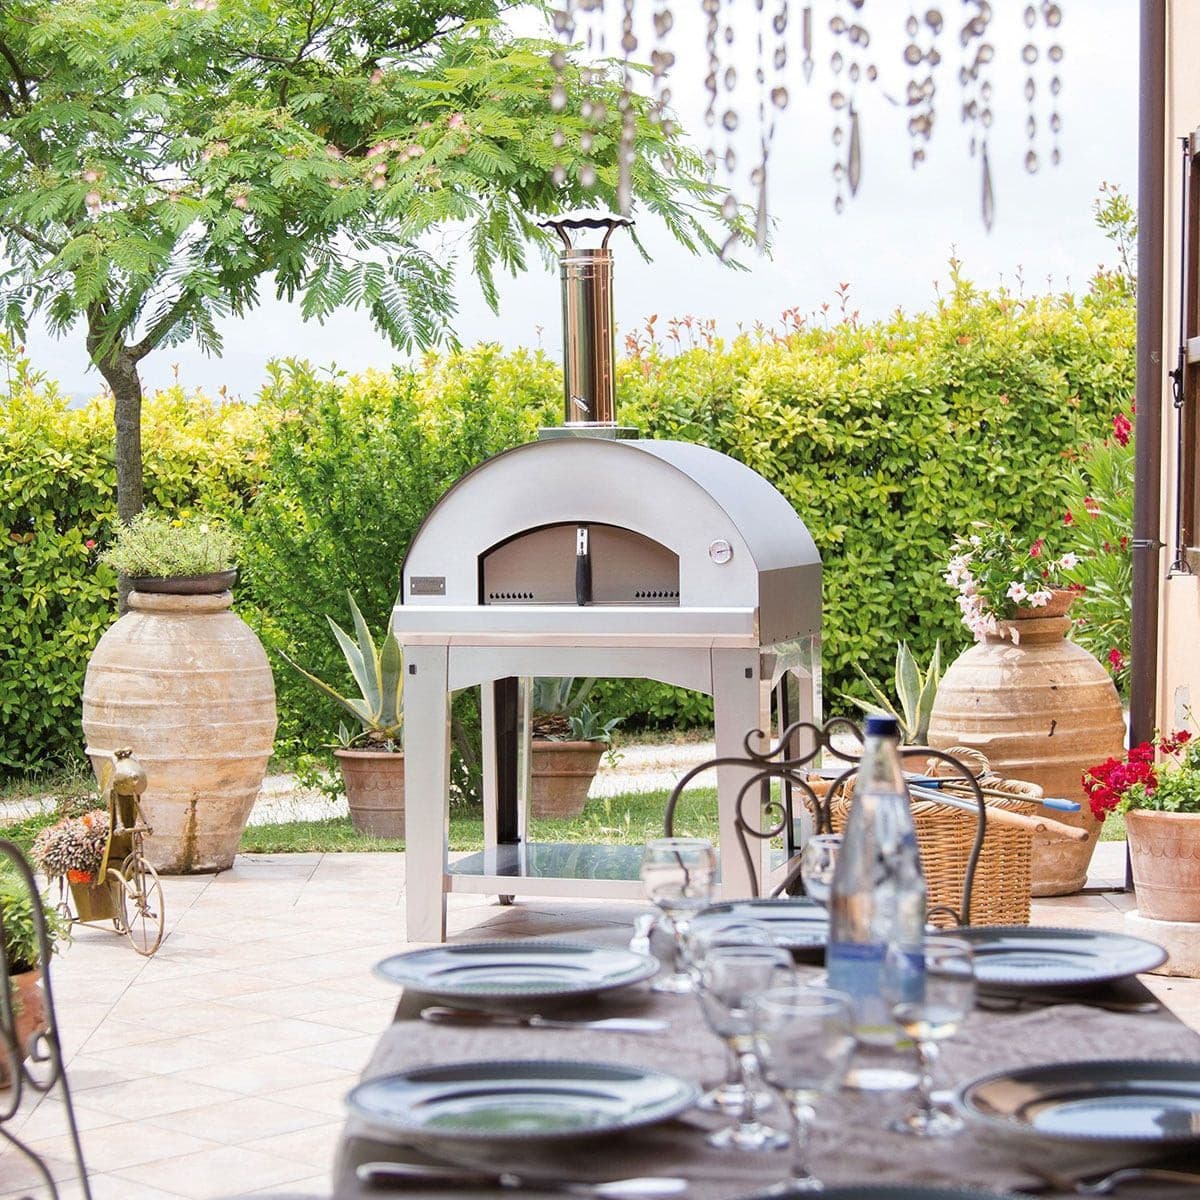 Fontana Mangiafuoco Wood Pizza Oven with Trolley - Vookoo Lifestyle